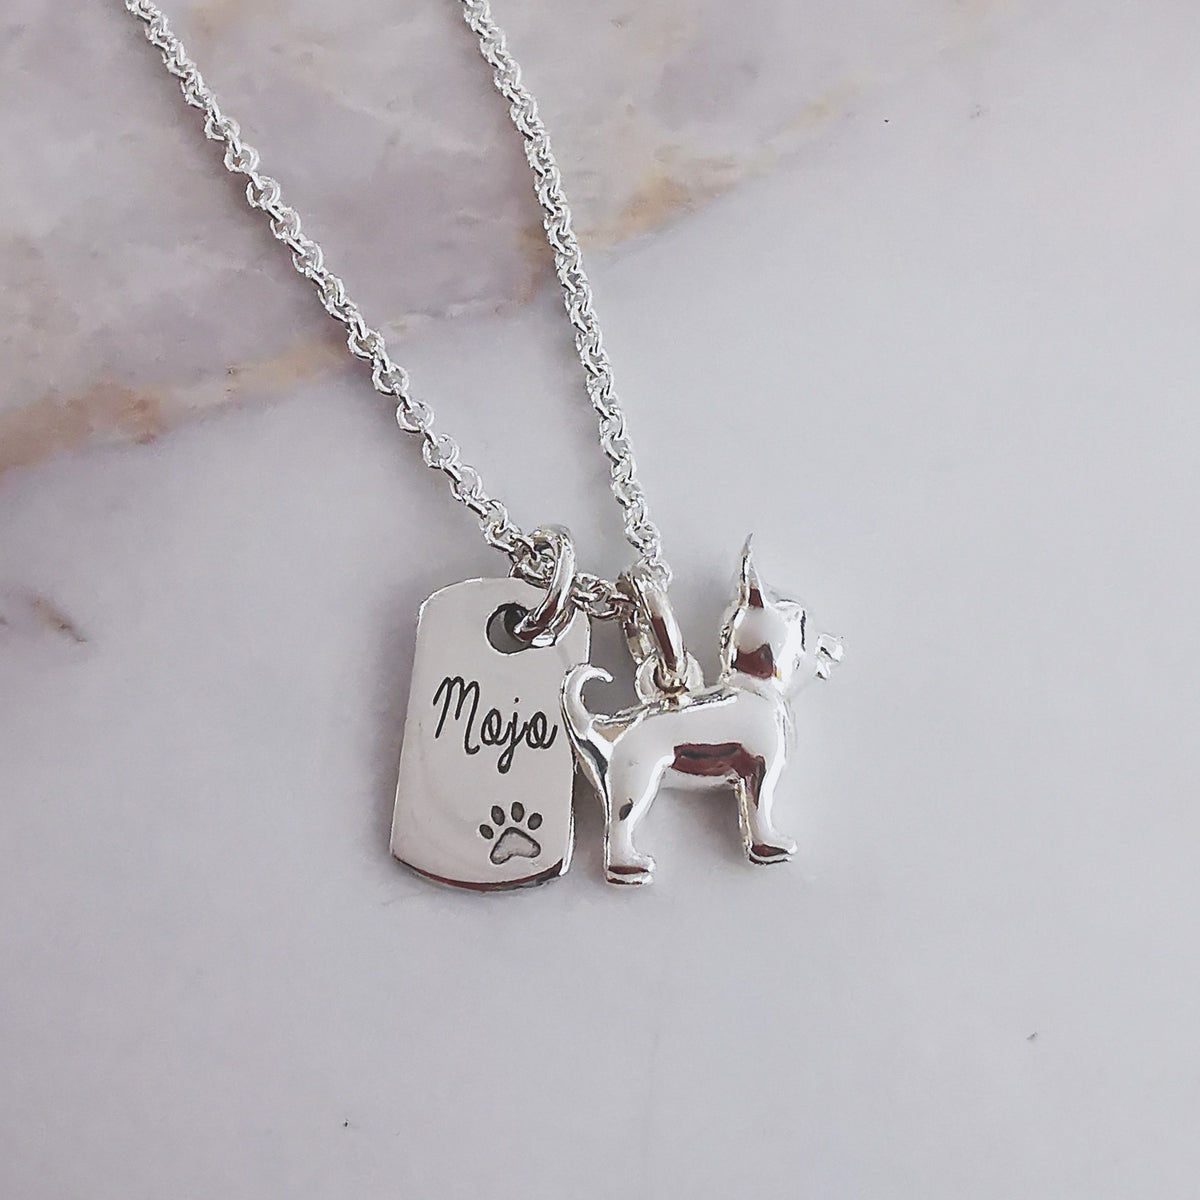 chihuahua dog silver necklace engraved jewellery gift for pet loss